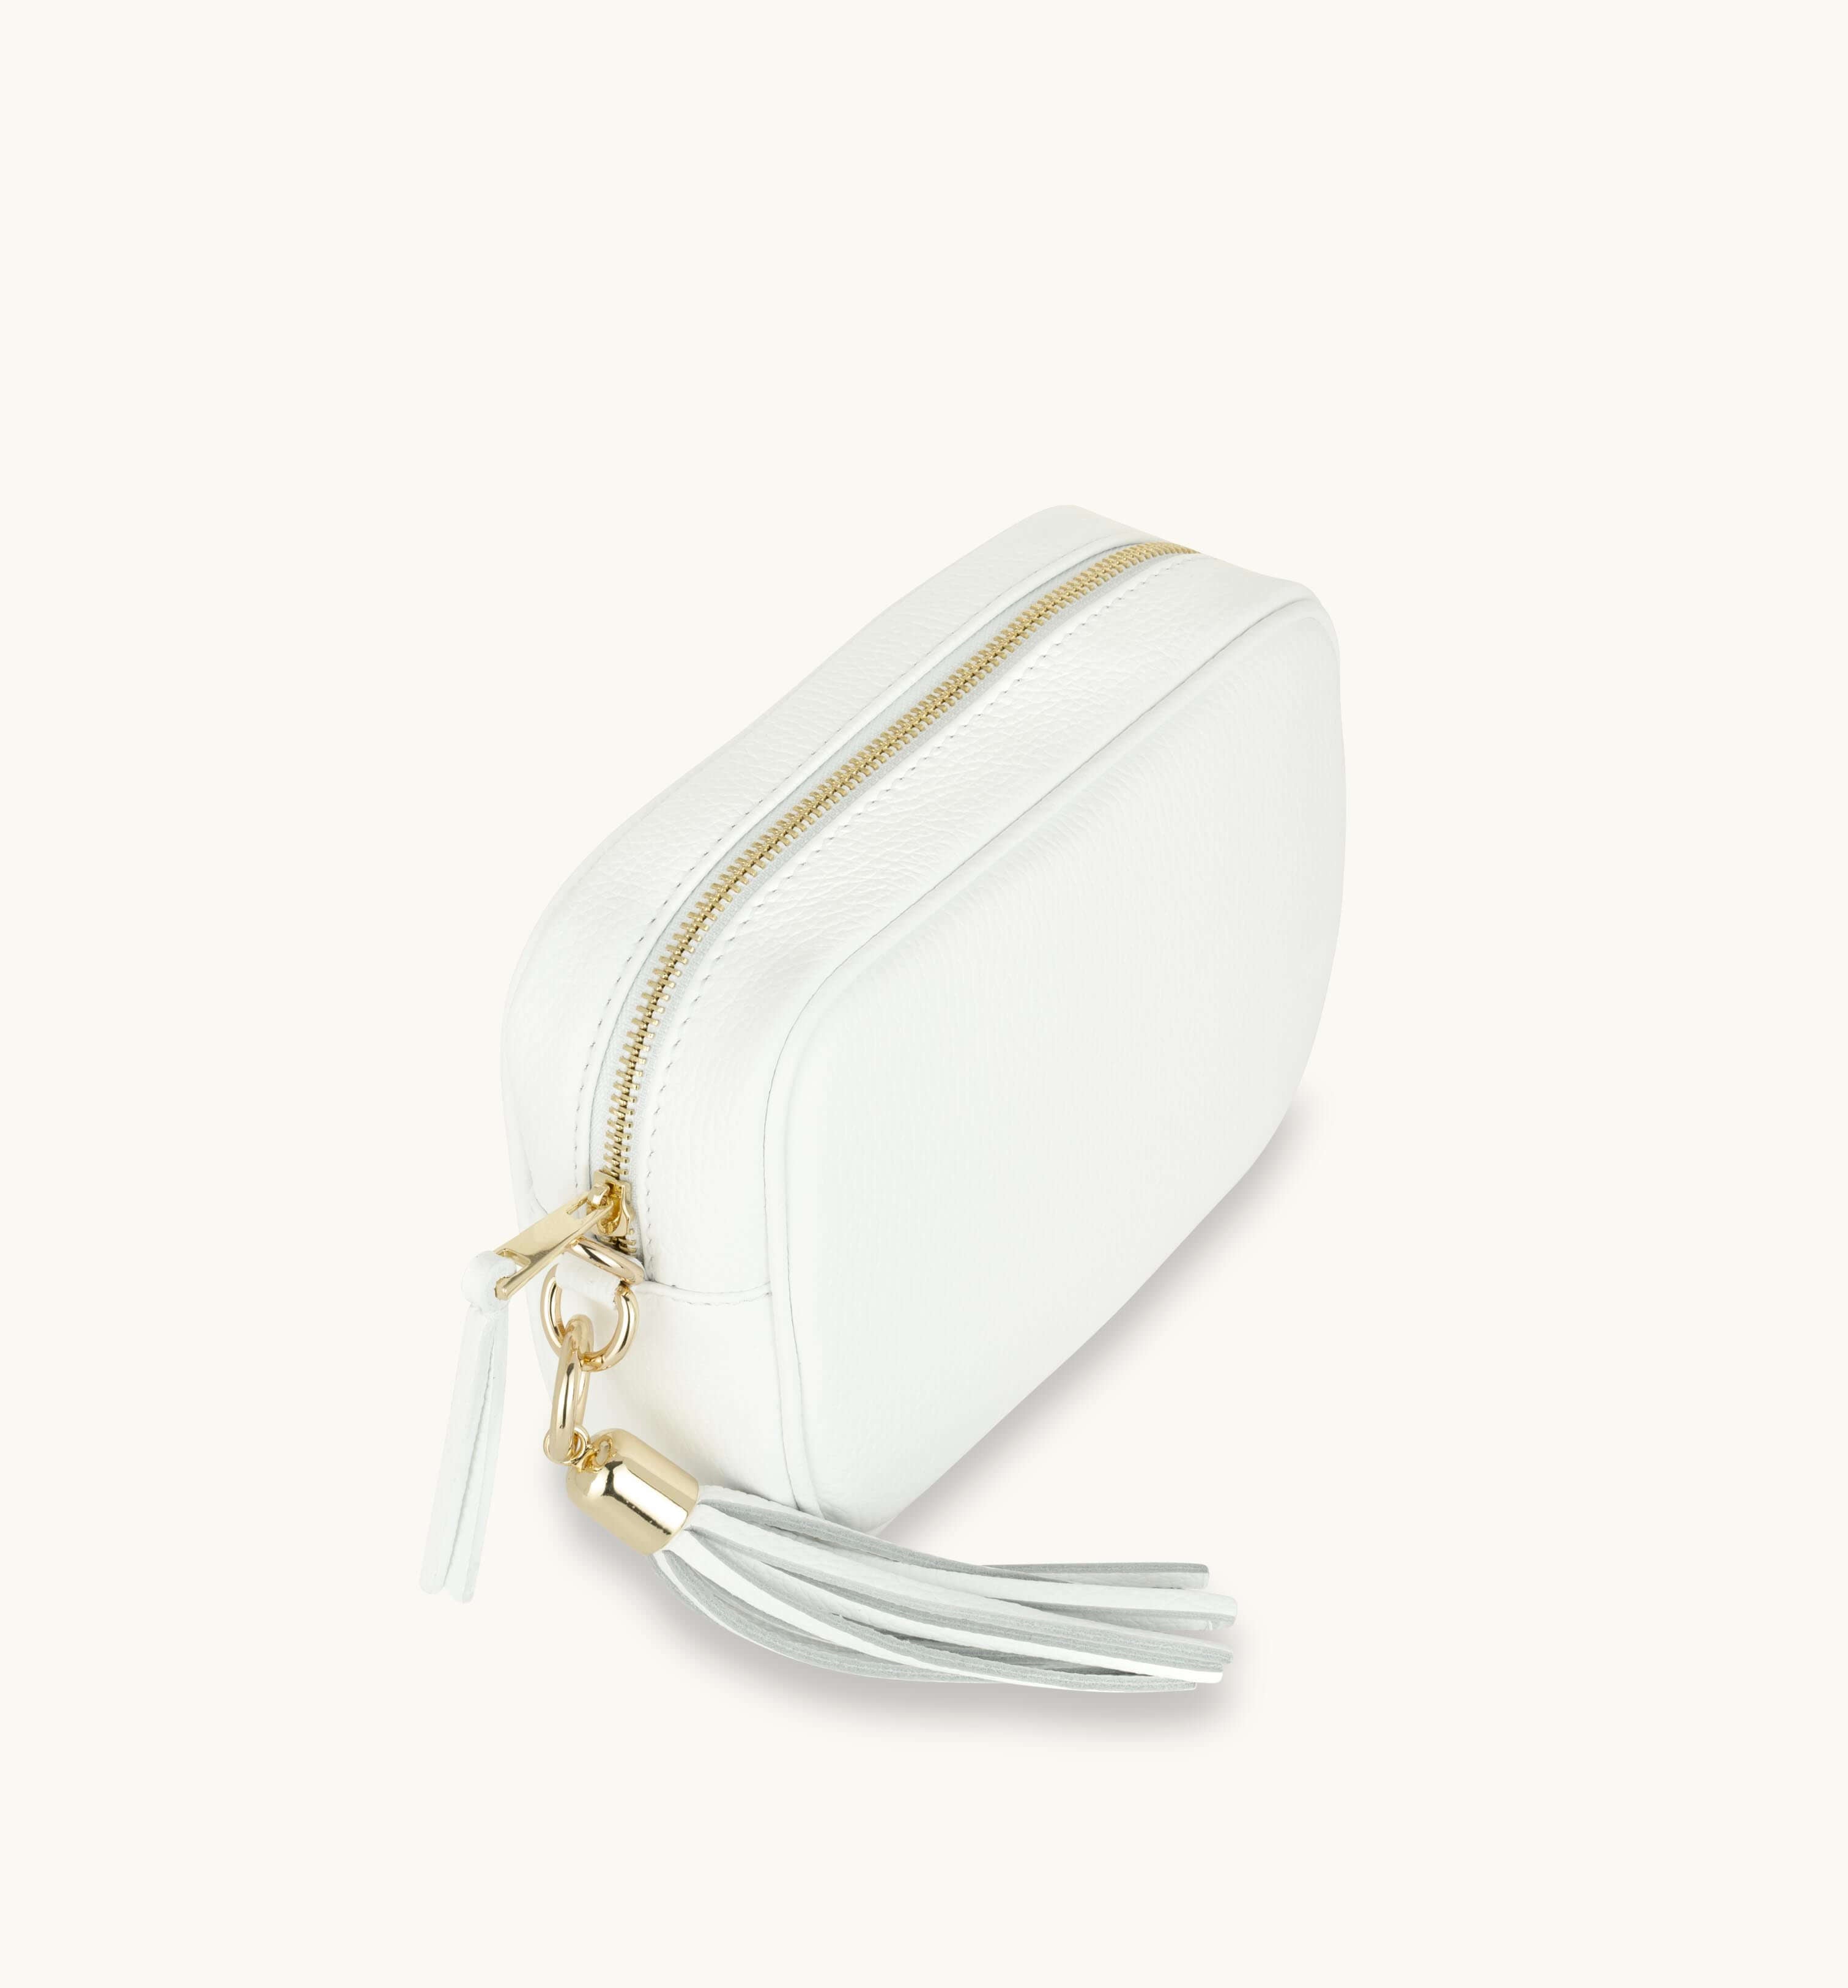 The Tassel White Leather Crossbody Bag With Gold Chain Strap